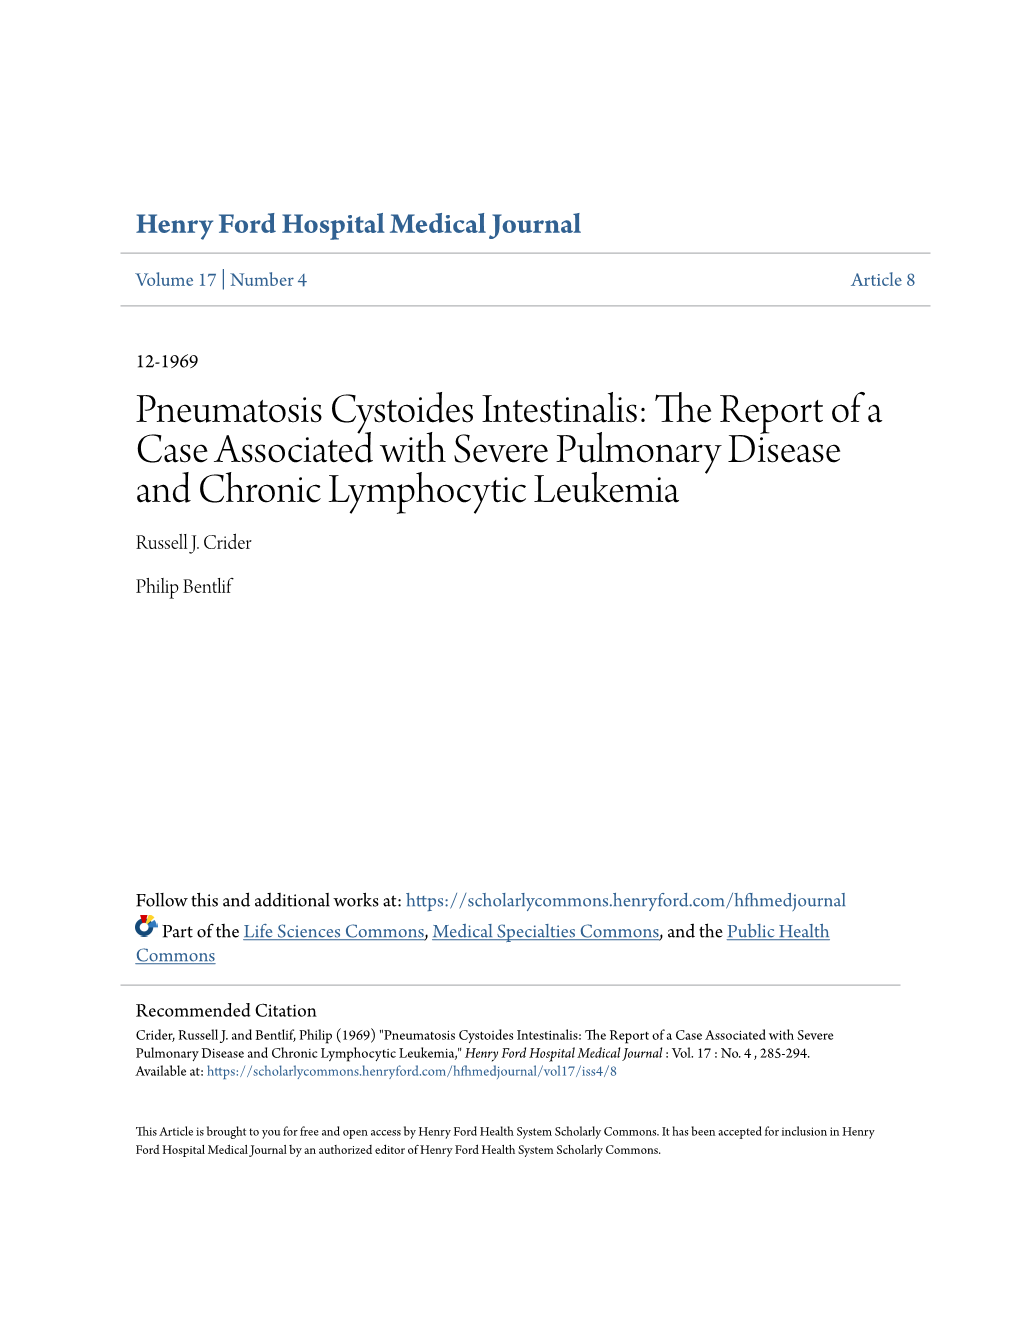 Pneumatosis Cystoides Intestinalis: the Report of a Case Associated with Severe Pulmonary Disease and Chronic Lymphocytic Leukemia Russell J